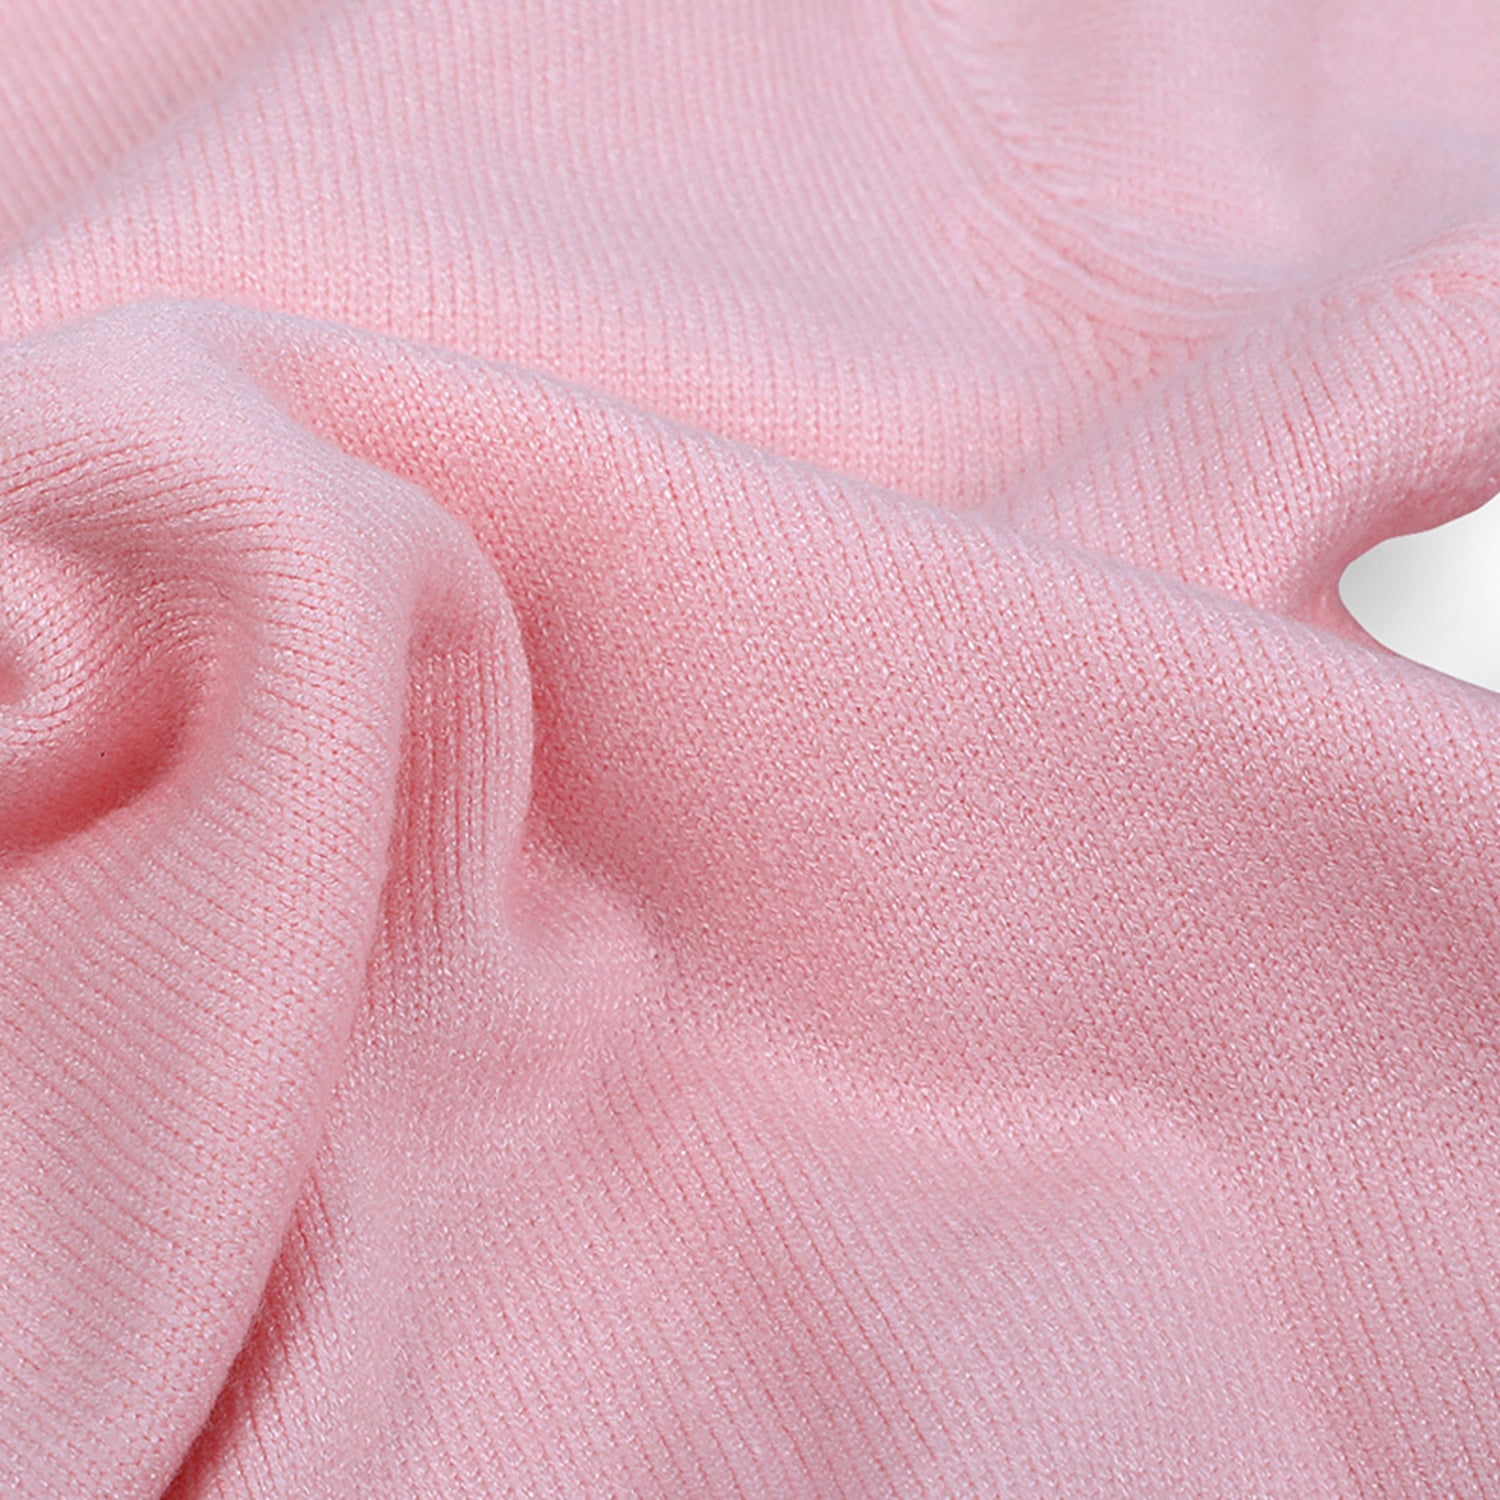 Basic Polo Neck Ribbed Premium Full Sleeves Knitted Kids Sweater - Pink